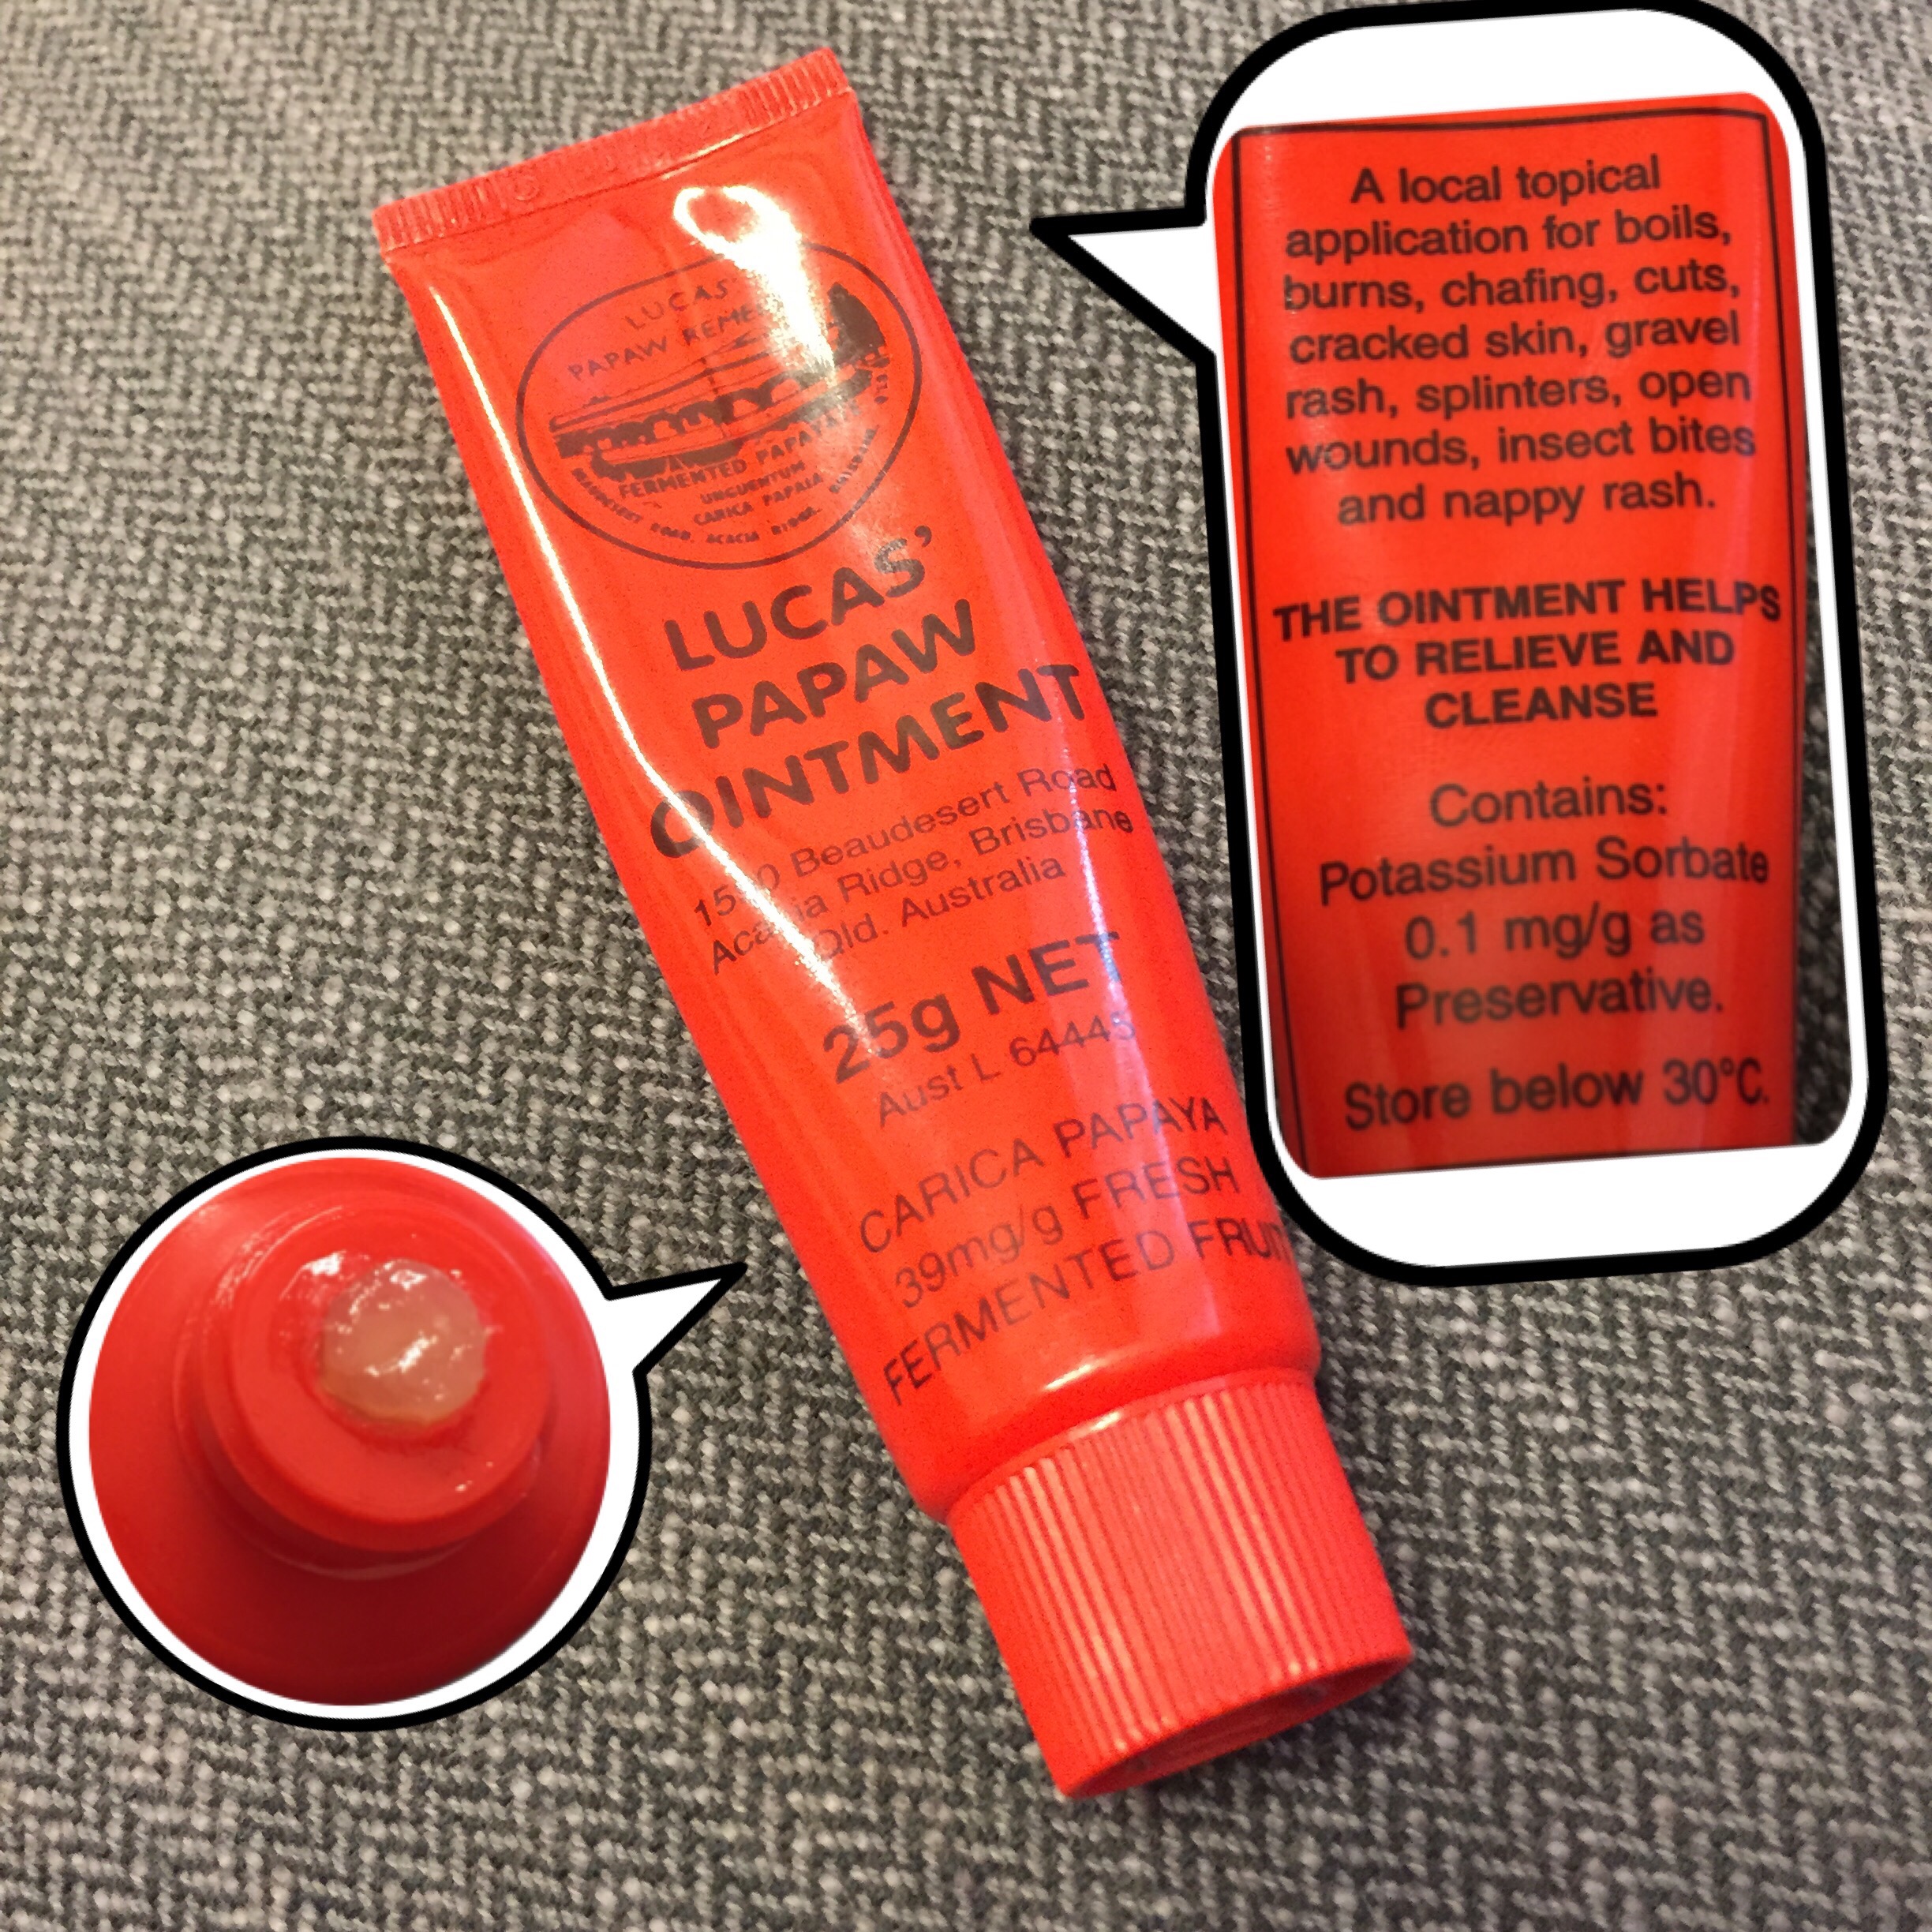 Review on the Lucas' PaPaw Ointment – well…… – thenobloggingblog